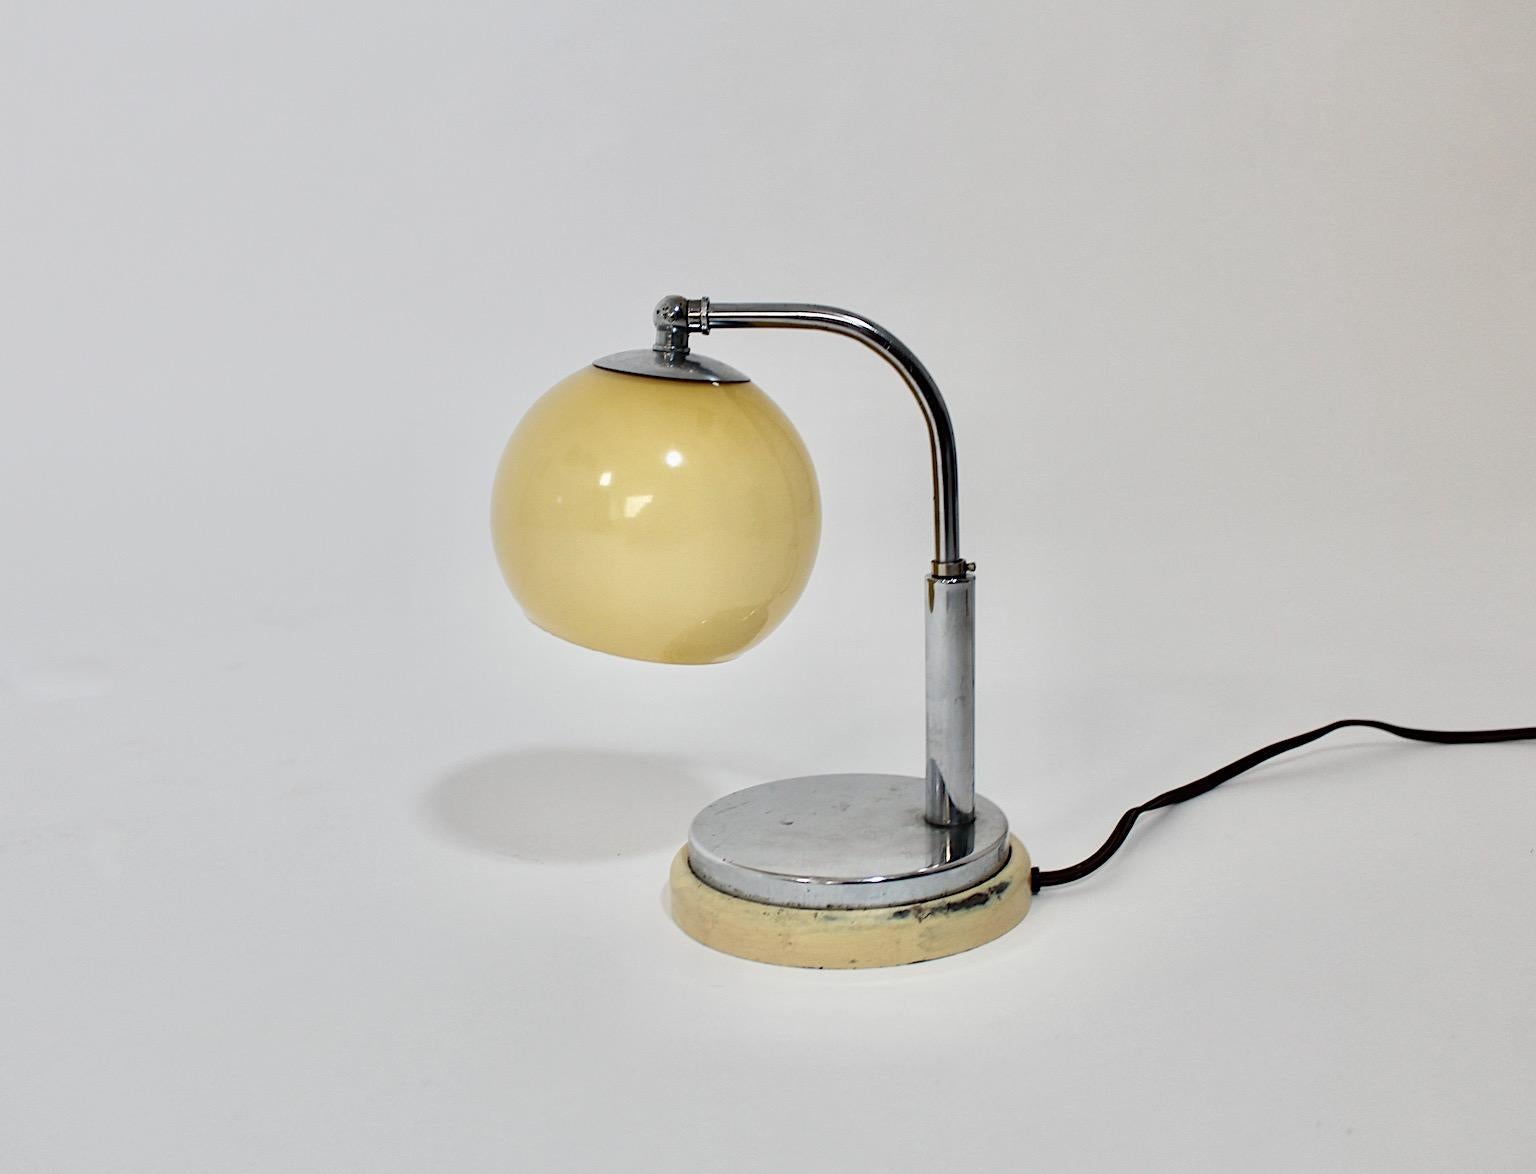 Bauhaus Vintage Table Lamp Bedside Lamp Marianne Brandt for Ruppelwerke 1920s  In Good Condition For Sale In Vienna, AT